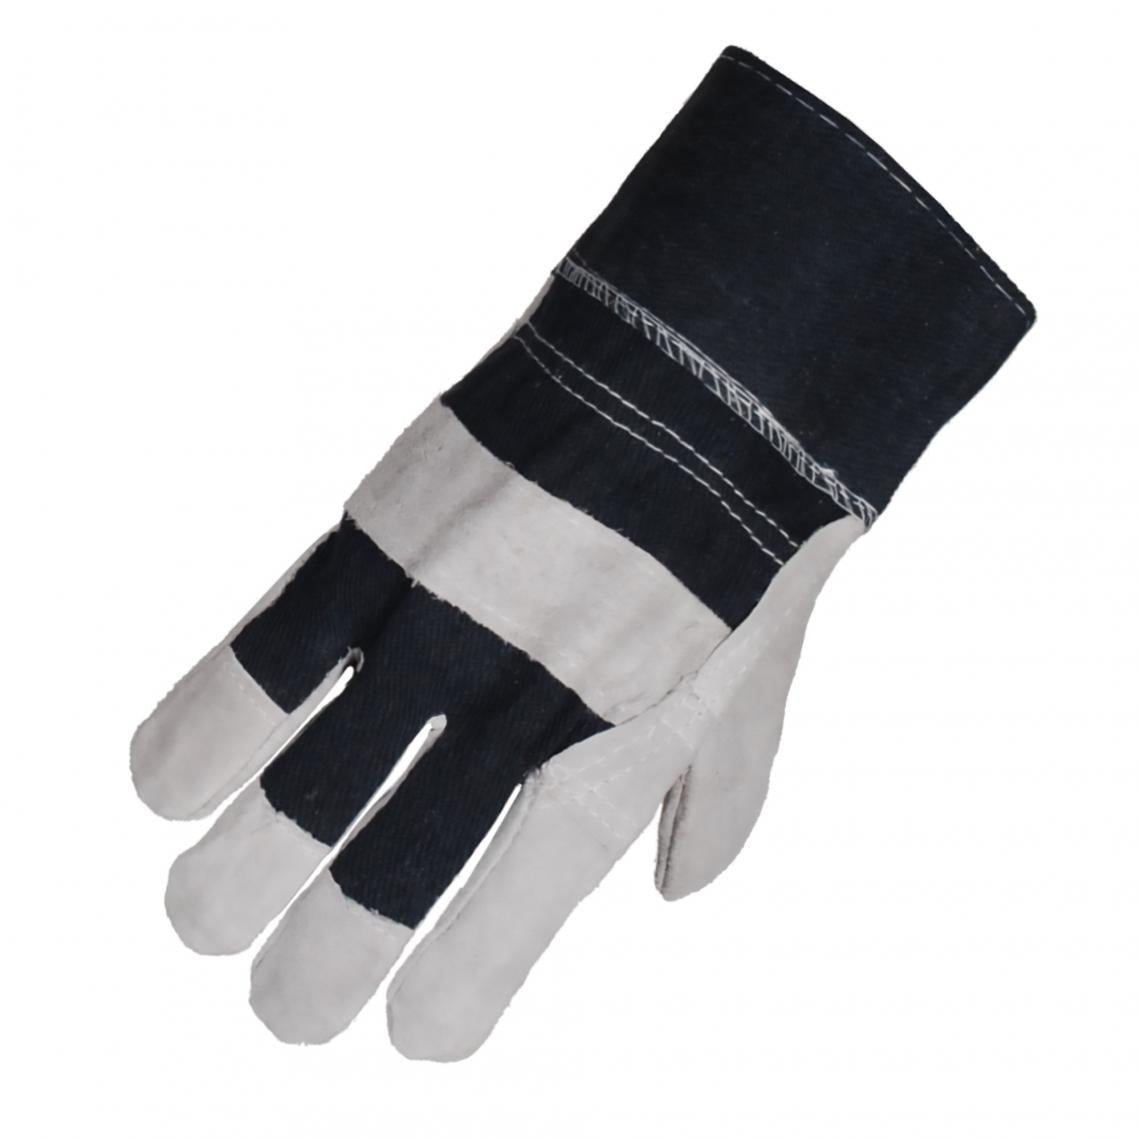 Horizon Denim Back Cowsplit Palm Work Gloves | Pack of 12 Pairs Work Gloves and Hats - Cleanflow